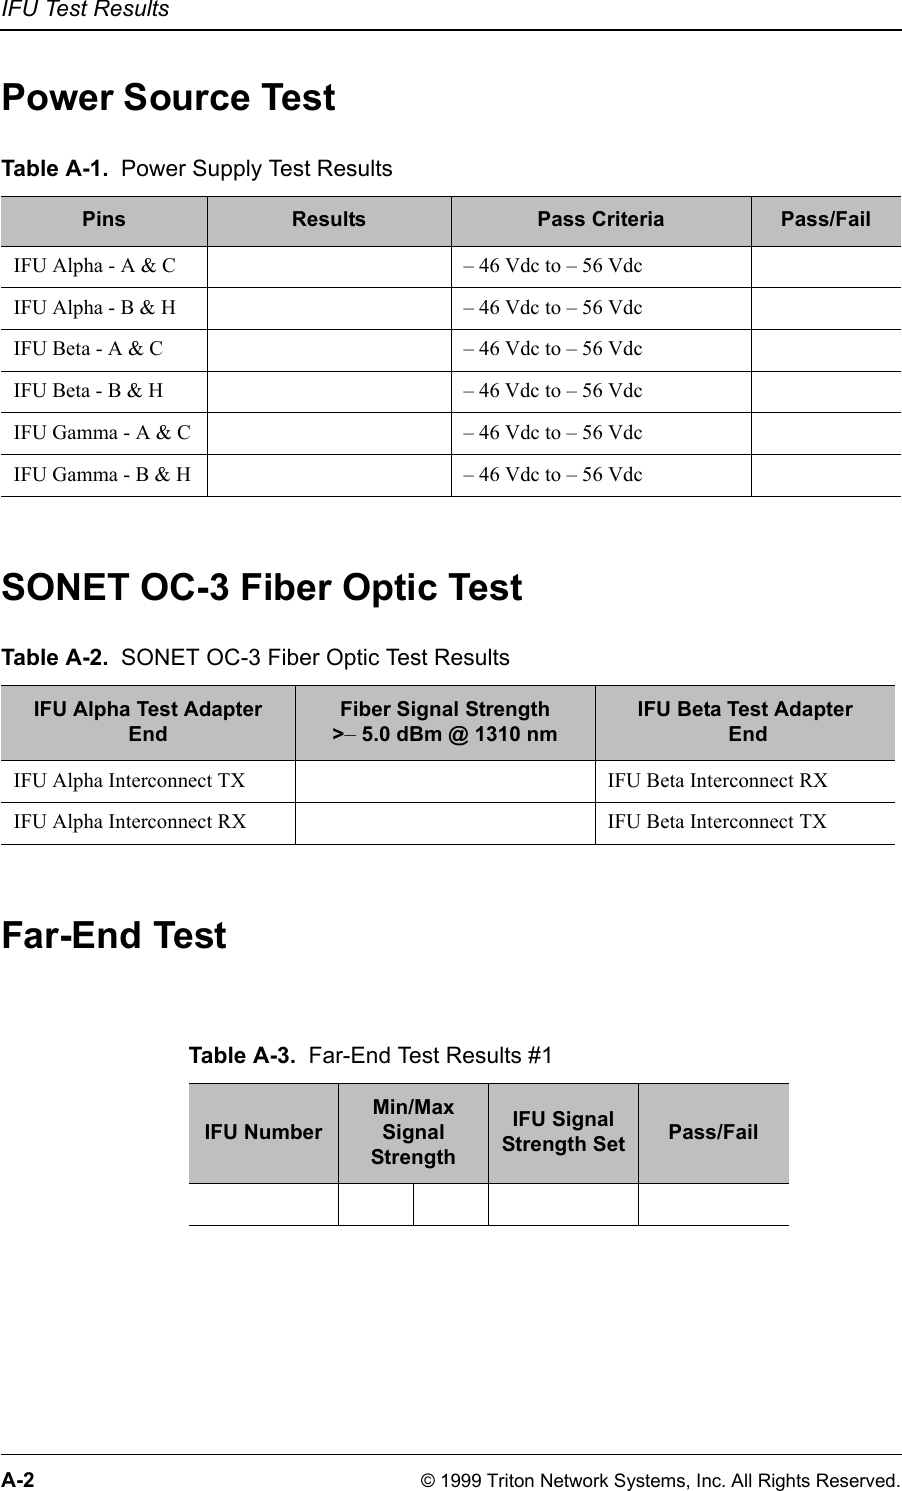 IFU Test ResultsA-2 © 1999 Triton Network Systems, Inc. All Rights Reserved.Power Source TestSONET OC-3 Fiber Optic TestFar-End Test Table A-1. Power Supply Test ResultsPins Results Pass Criteria Pass/FailIFU Alpha - A &amp; C – 46 Vdc to – 56 VdcIFU Alpha - B &amp; H – 46 Vdc to – 56 VdcIFU Beta - A &amp; C – 46 Vdc to – 56 VdcIFU Beta - B &amp; H – 46 Vdc to – 56 VdcIFU Gamma - A &amp; C – 46 Vdc to – 56 VdcIFU Gamma - B &amp; H – 46 Vdc to – 56 VdcTable A-2. SONET OC-3 Fiber Optic Test ResultsIFU Alpha Test Adapter EndFiber Signal Strength&gt;– 5.0 dBm @ 1310 nmIFU Beta Test Adapter EndIFU Alpha Interconnect TX IFU Beta Interconnect RXIFU Alpha Interconnect RX IFU Beta Interconnect TXTable A-3. Far-End Test Results #1IFU NumberMin/MaxSignal StrengthIFU Signal Strength Set Pass/Fail